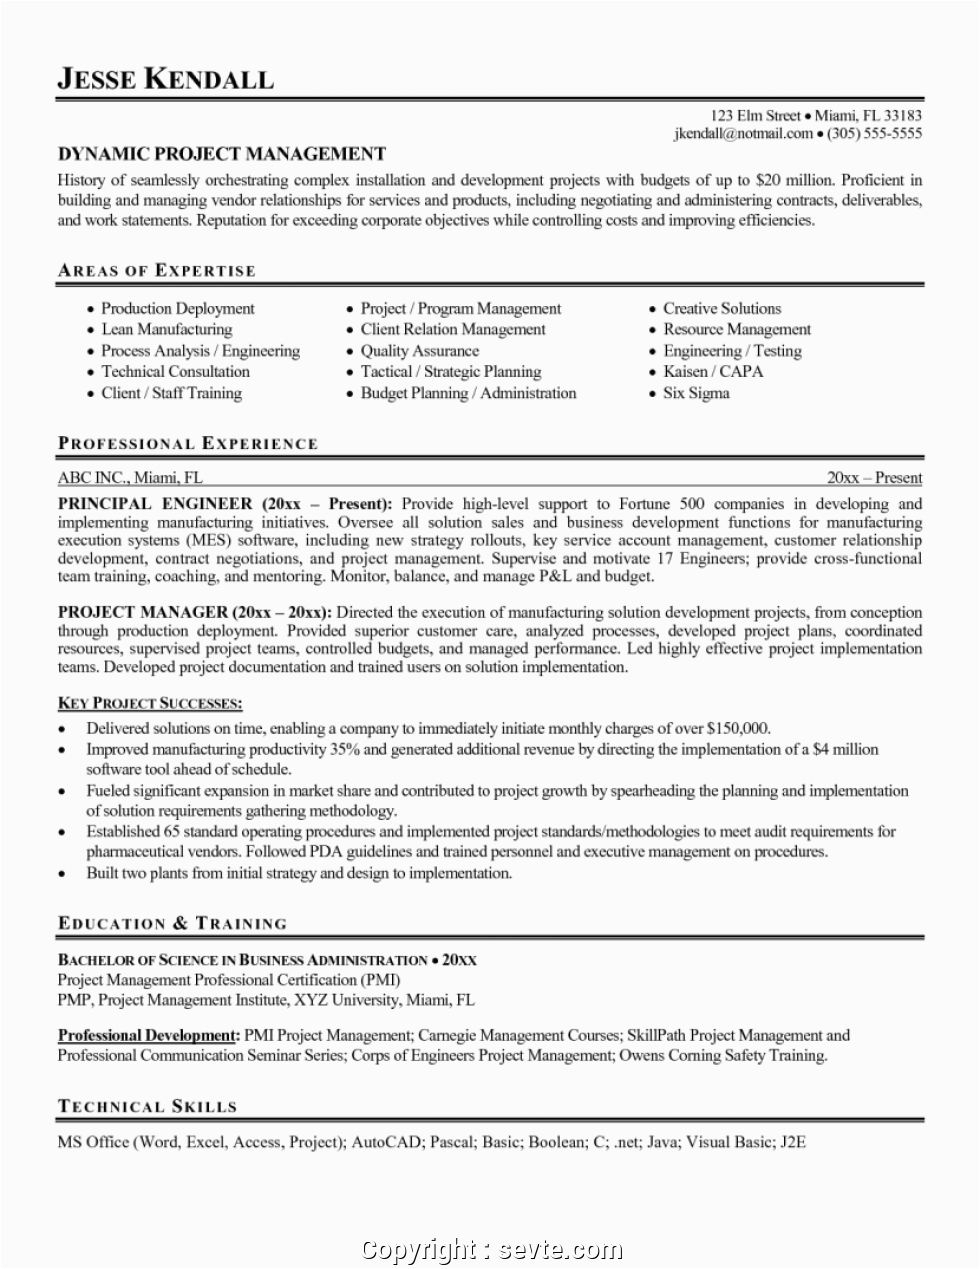 Sample Resume Objective Statements for Project Manager Make Project Manager Resume Objective Statement Examples